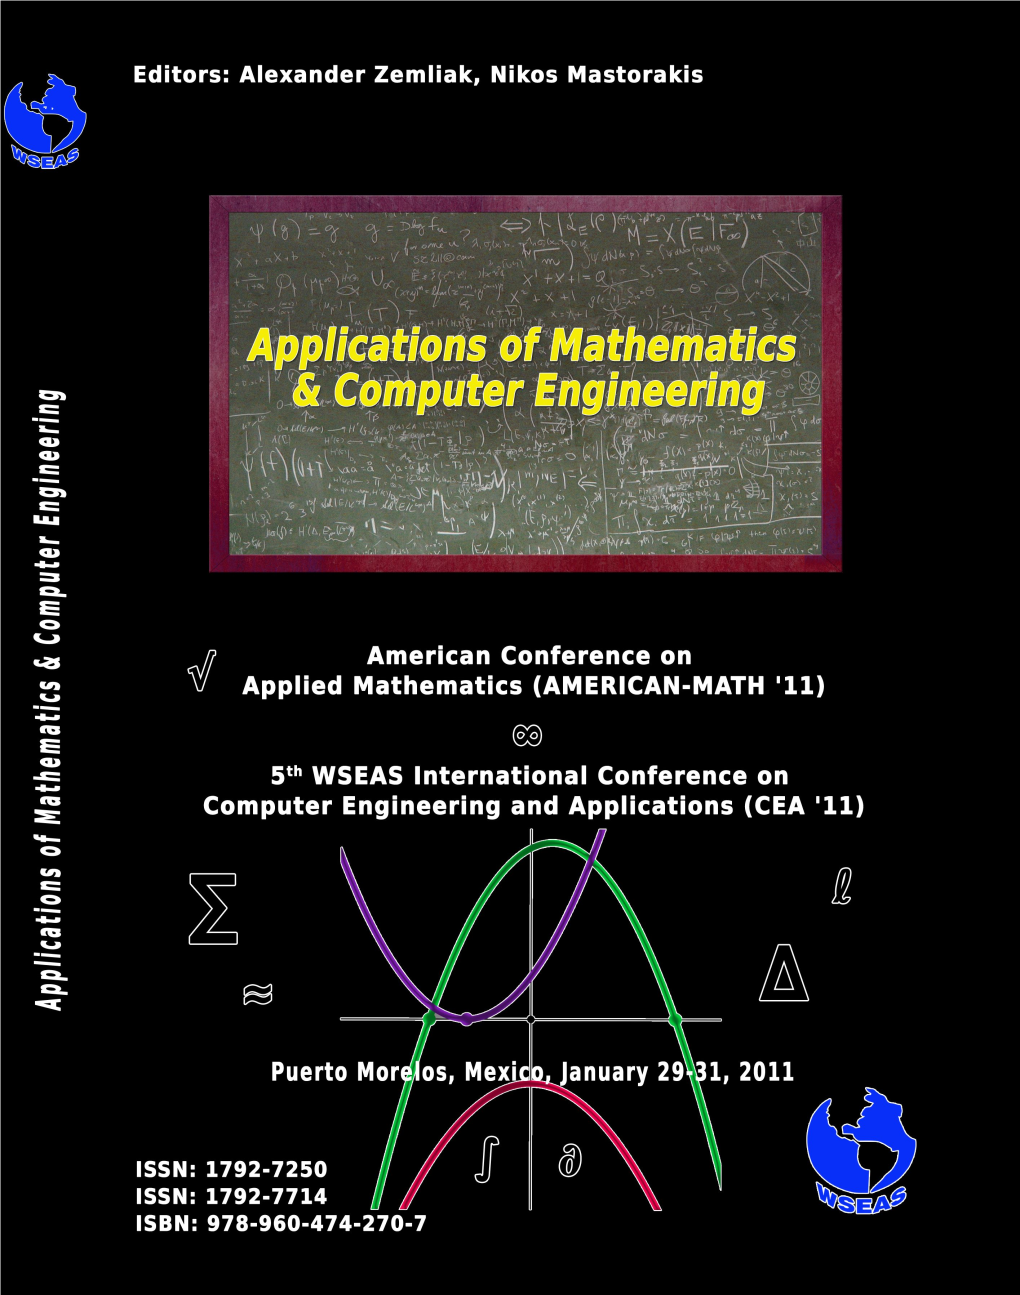 AMERICAN-MATH '11) 5Th WSEAS International Conference on COMPUTER ENGINEERING and APPLICATIONS (CEA '11